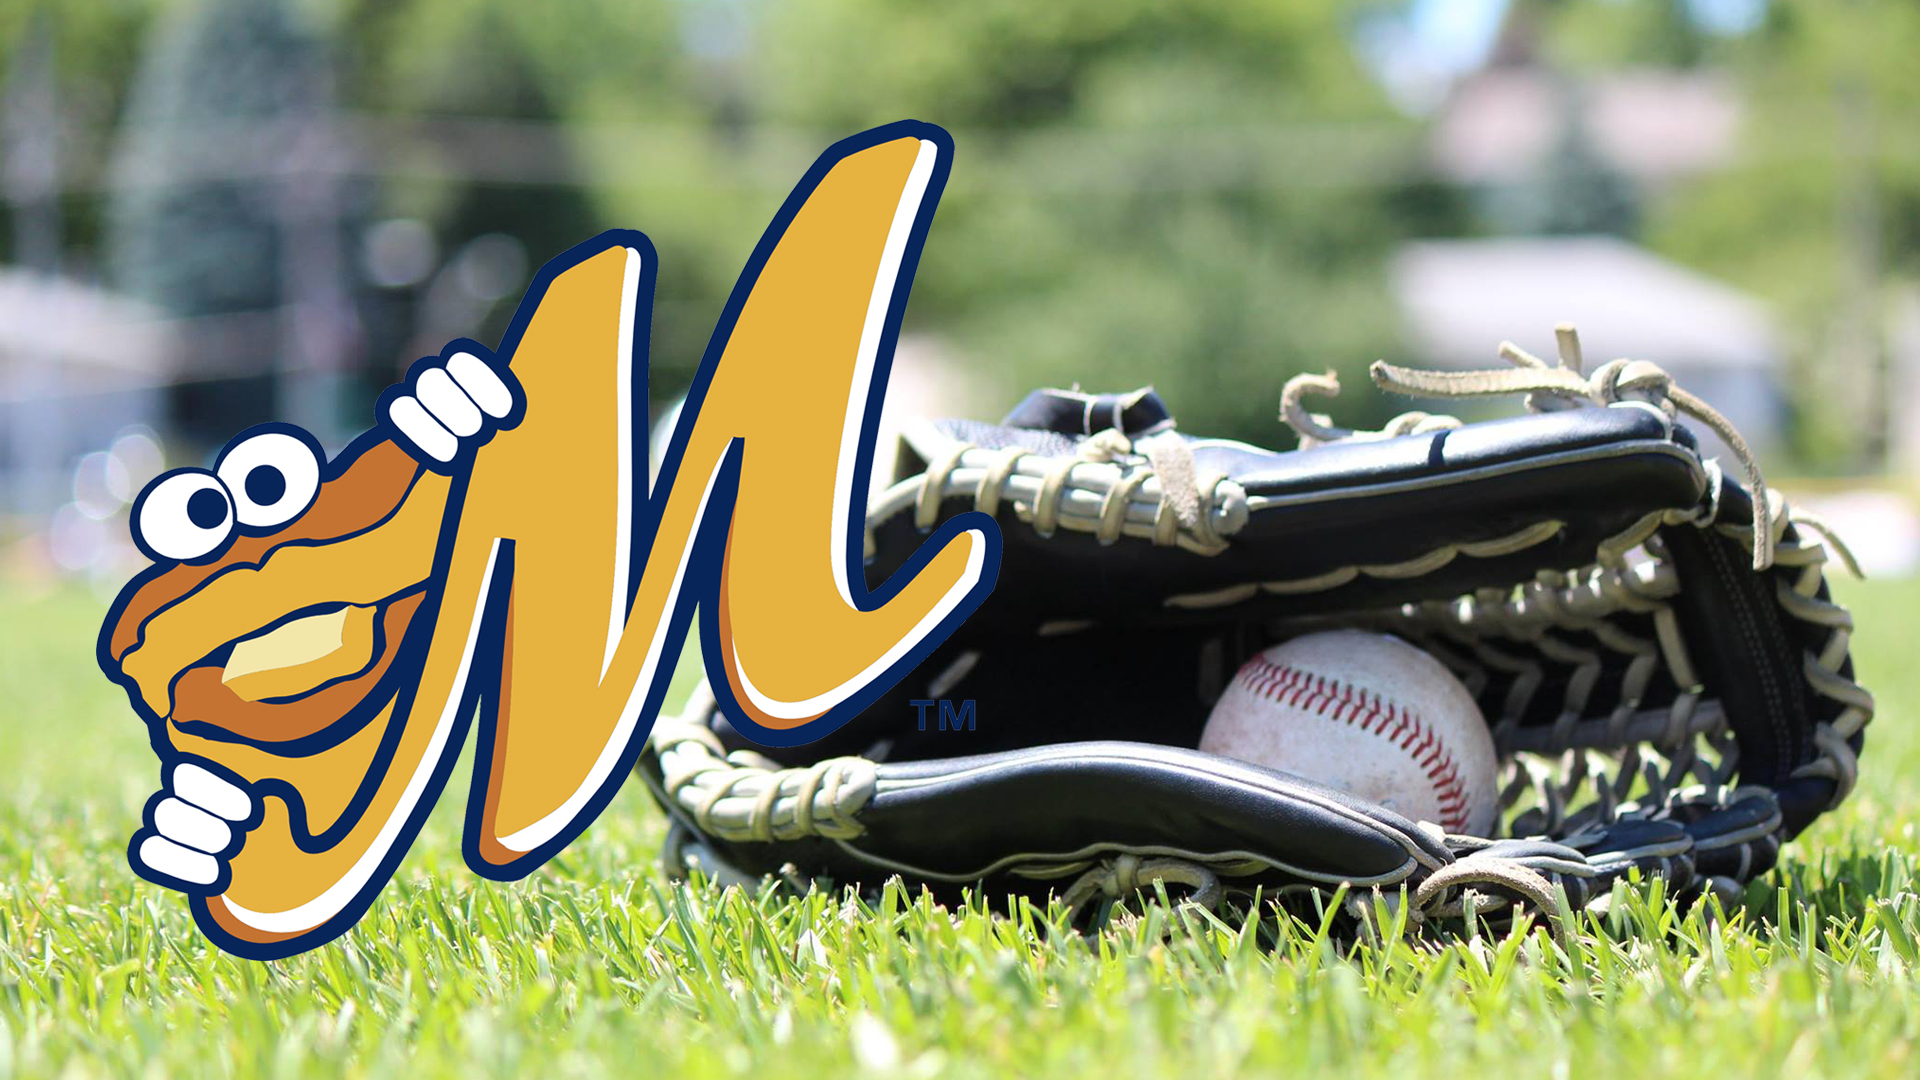 Montgomery Biscuits host Tampa Bay Rays